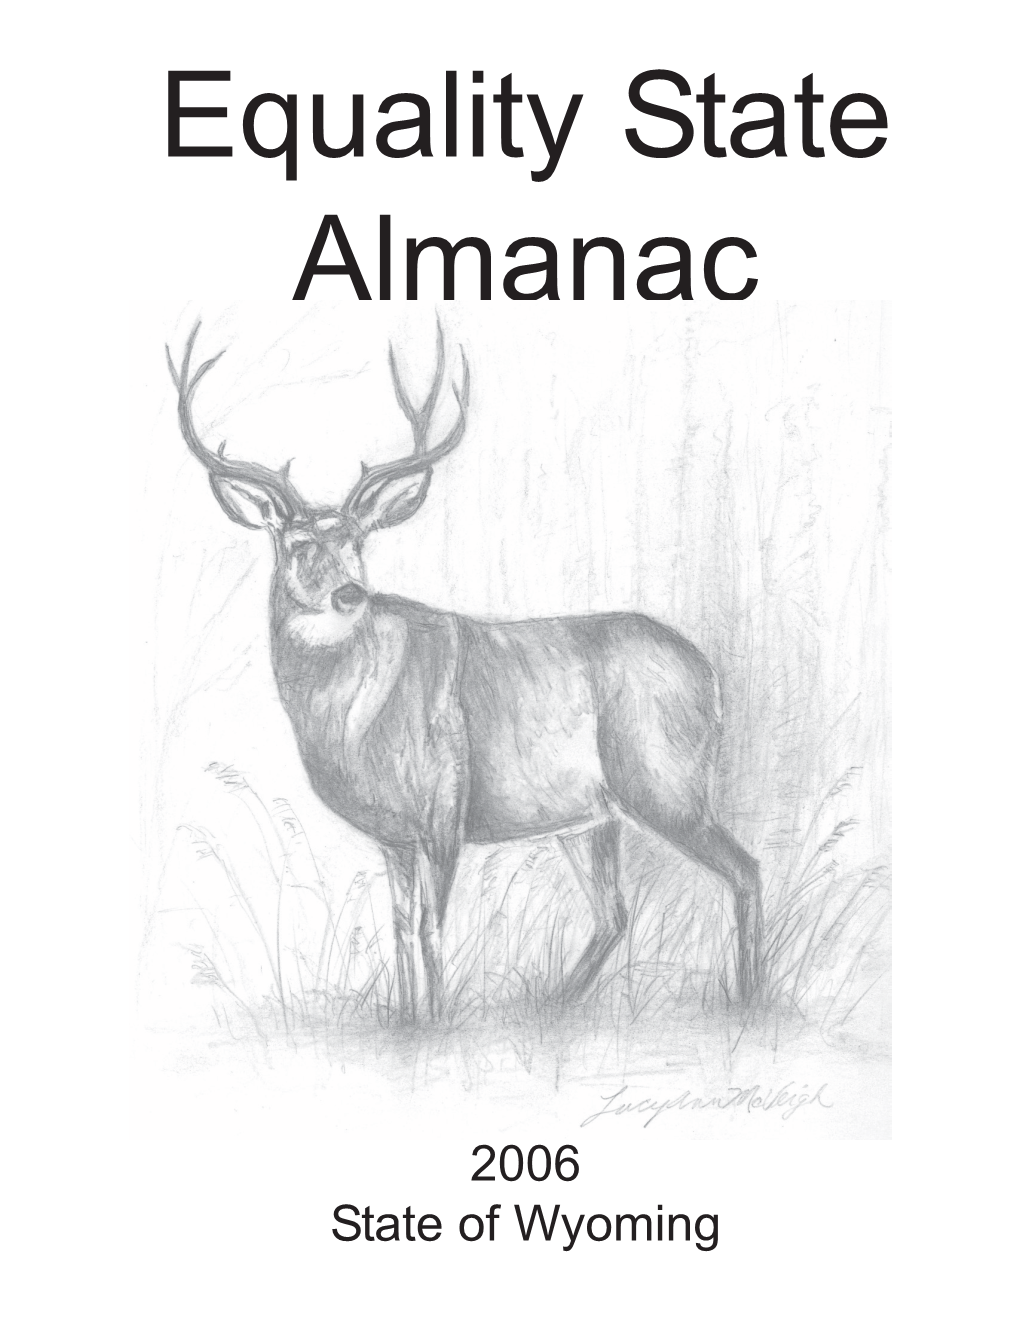 2006 State of Wyoming COVER: by Lucy Ann Mcveigh EQUALITY STATE ALMANAC 2006